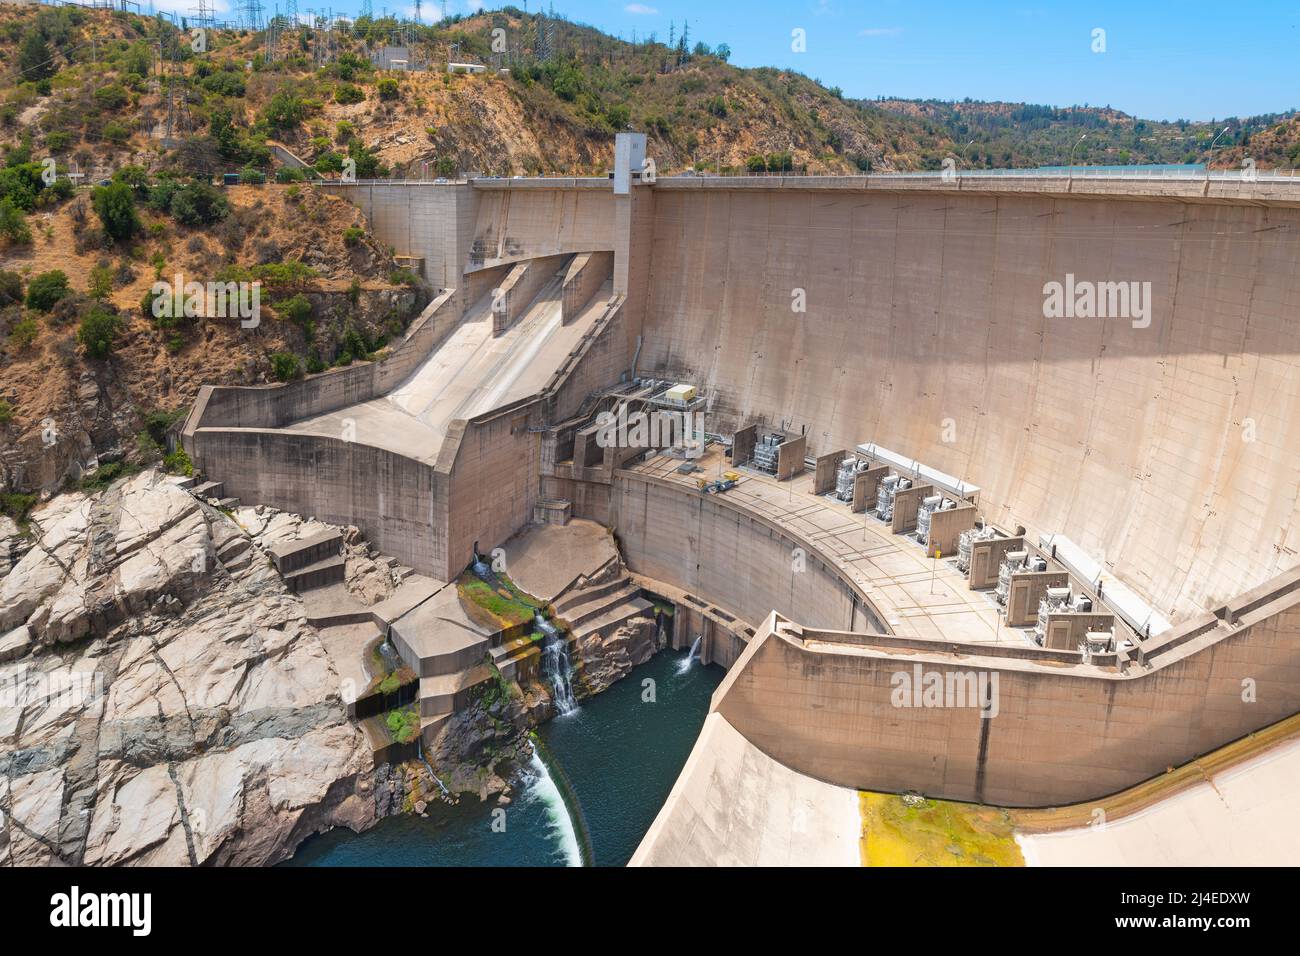 The Rapel dam over the Rapel river, an Hydroelectric power station at the VI Region of Chile. Stock Photo